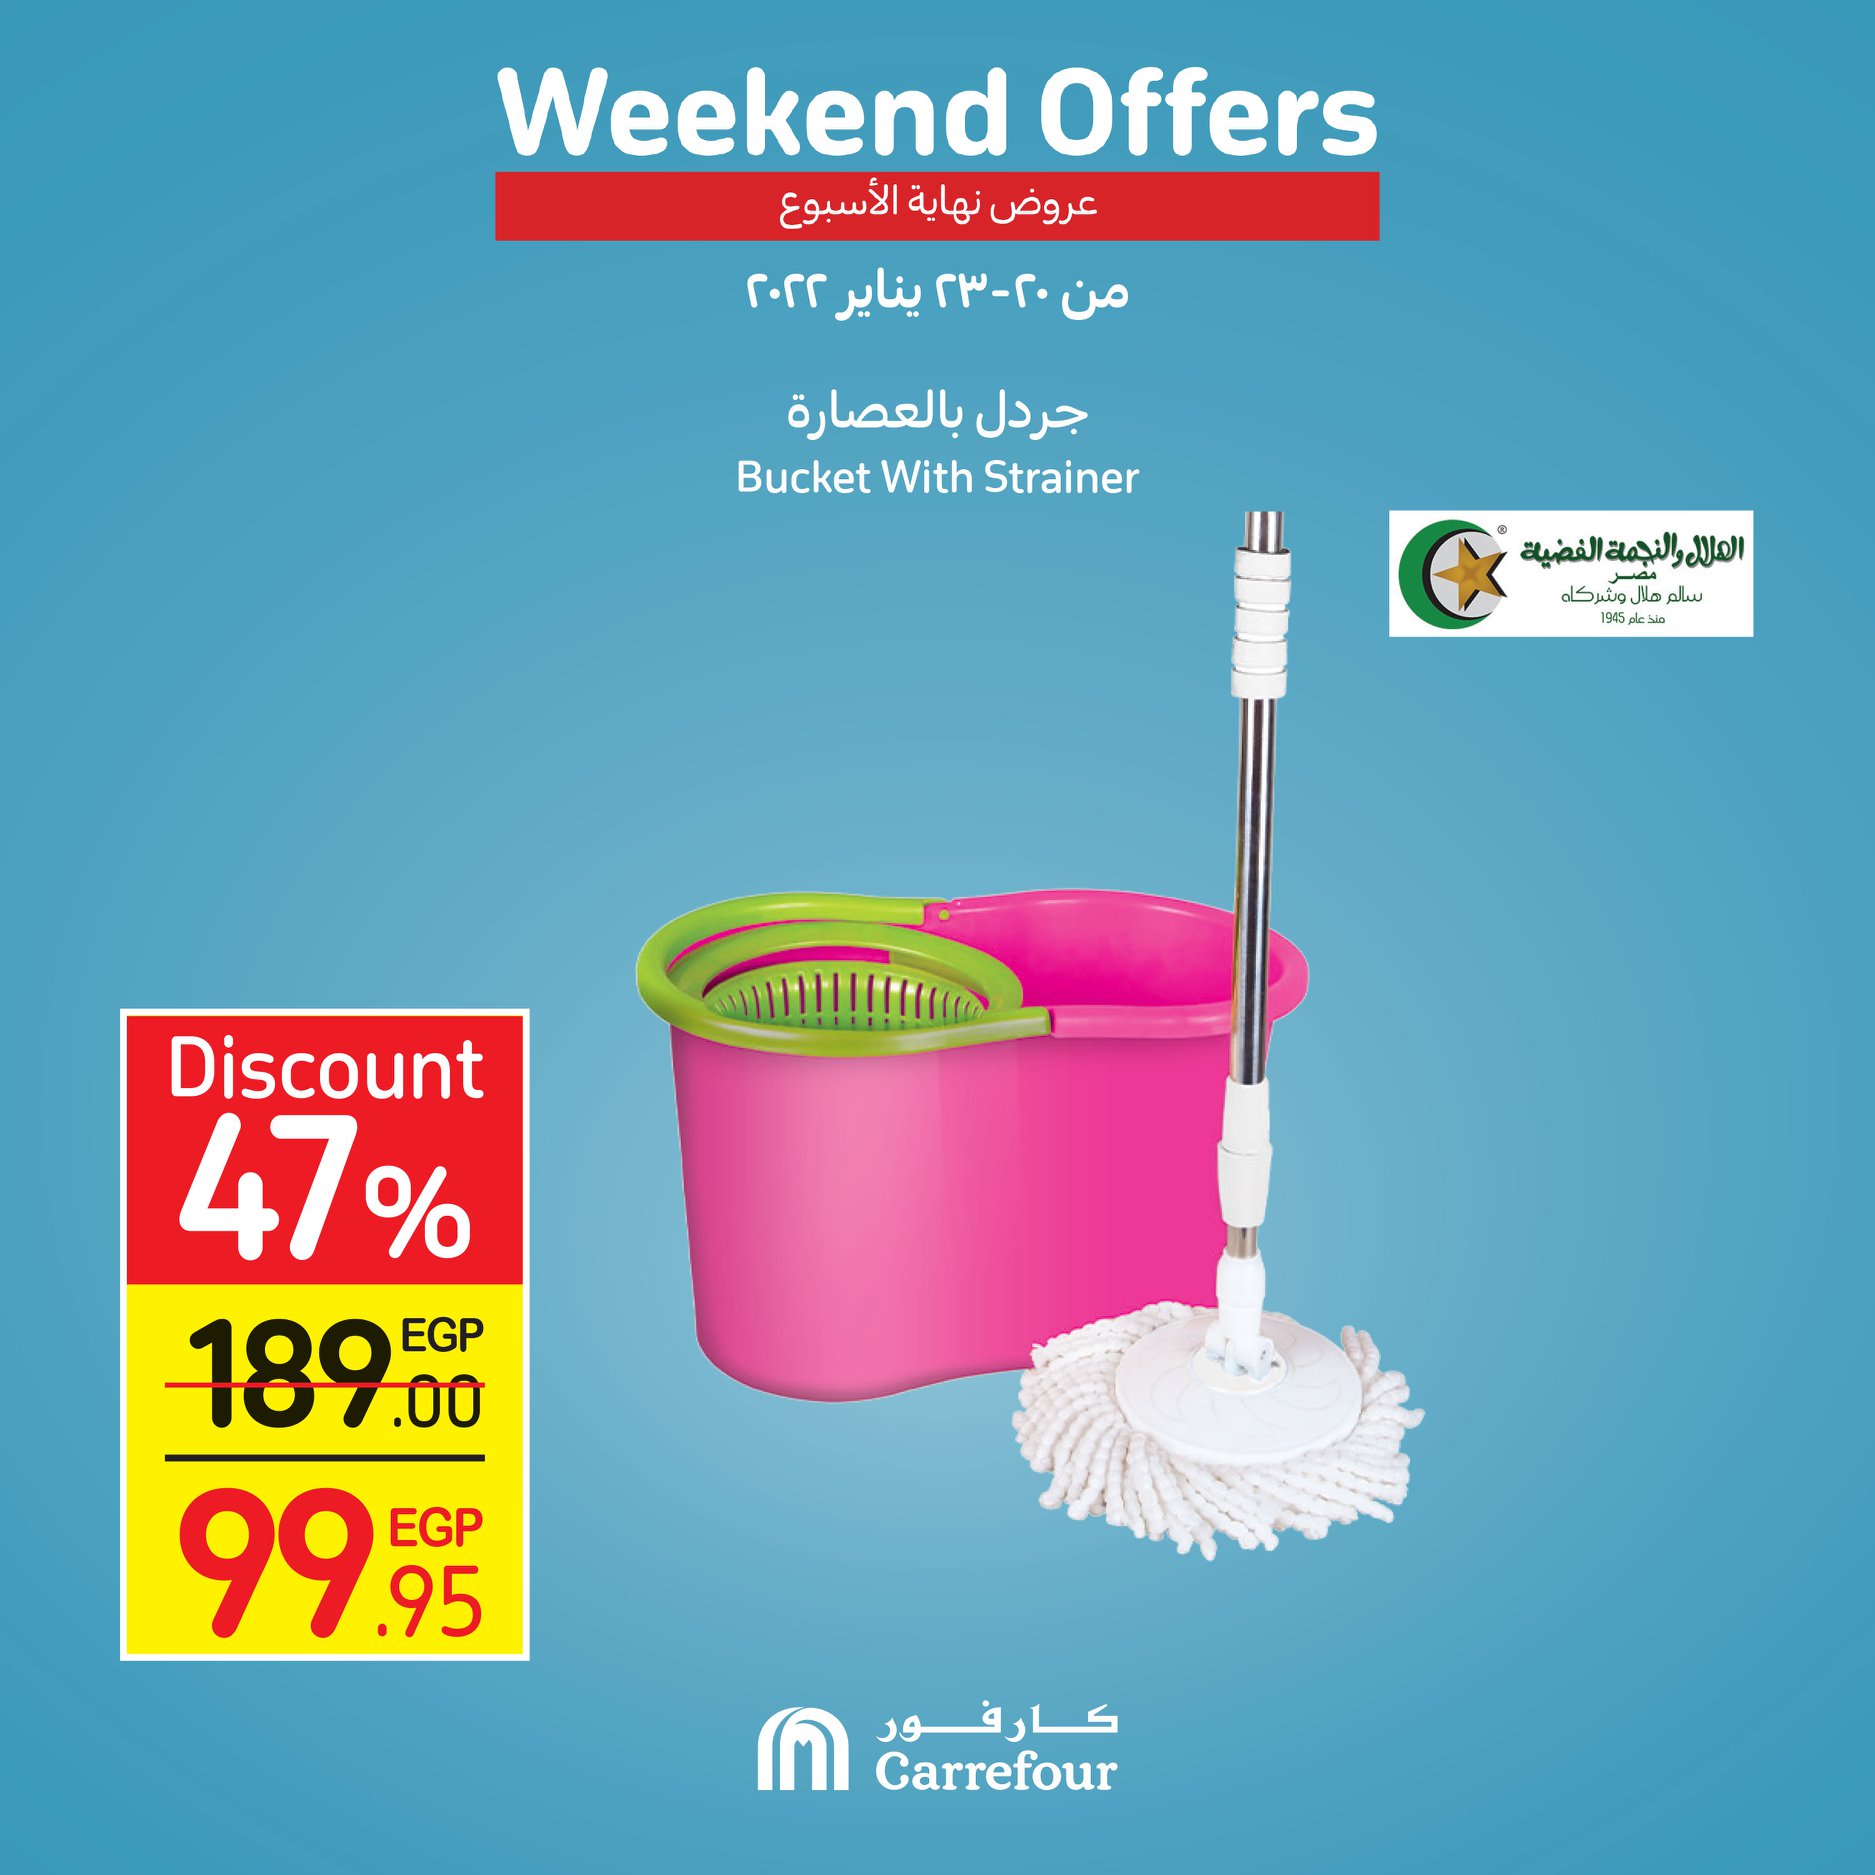 Watch Carrefour's gifts and surprises at Weekend and dirt cheap prices 29